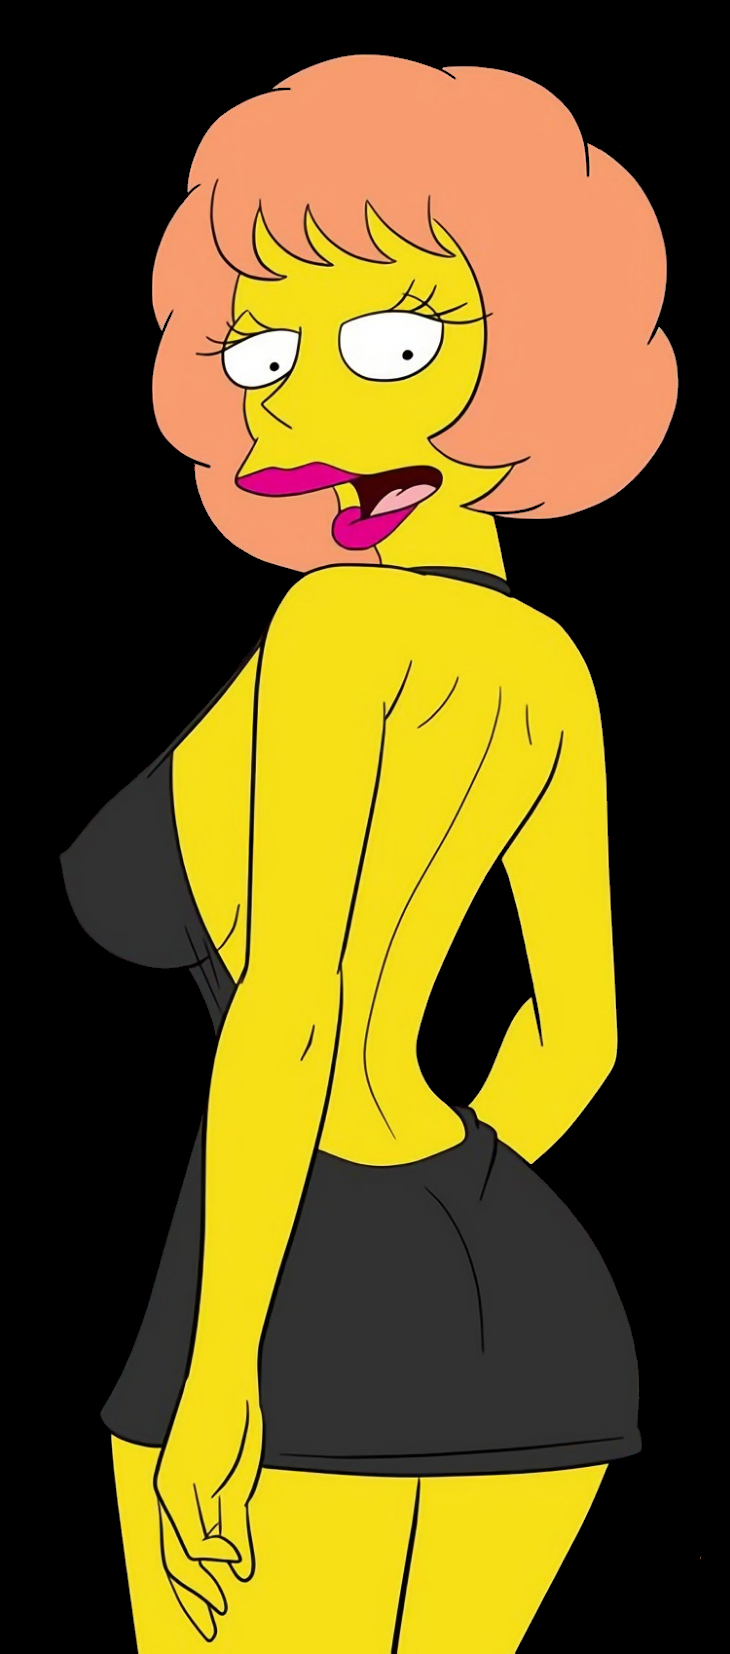 1girl back_view bare_back black_background black_dress croc_(artist) dress maude_flanders provocating provocative sensual short_dress solo the_simpsons yellow_skin